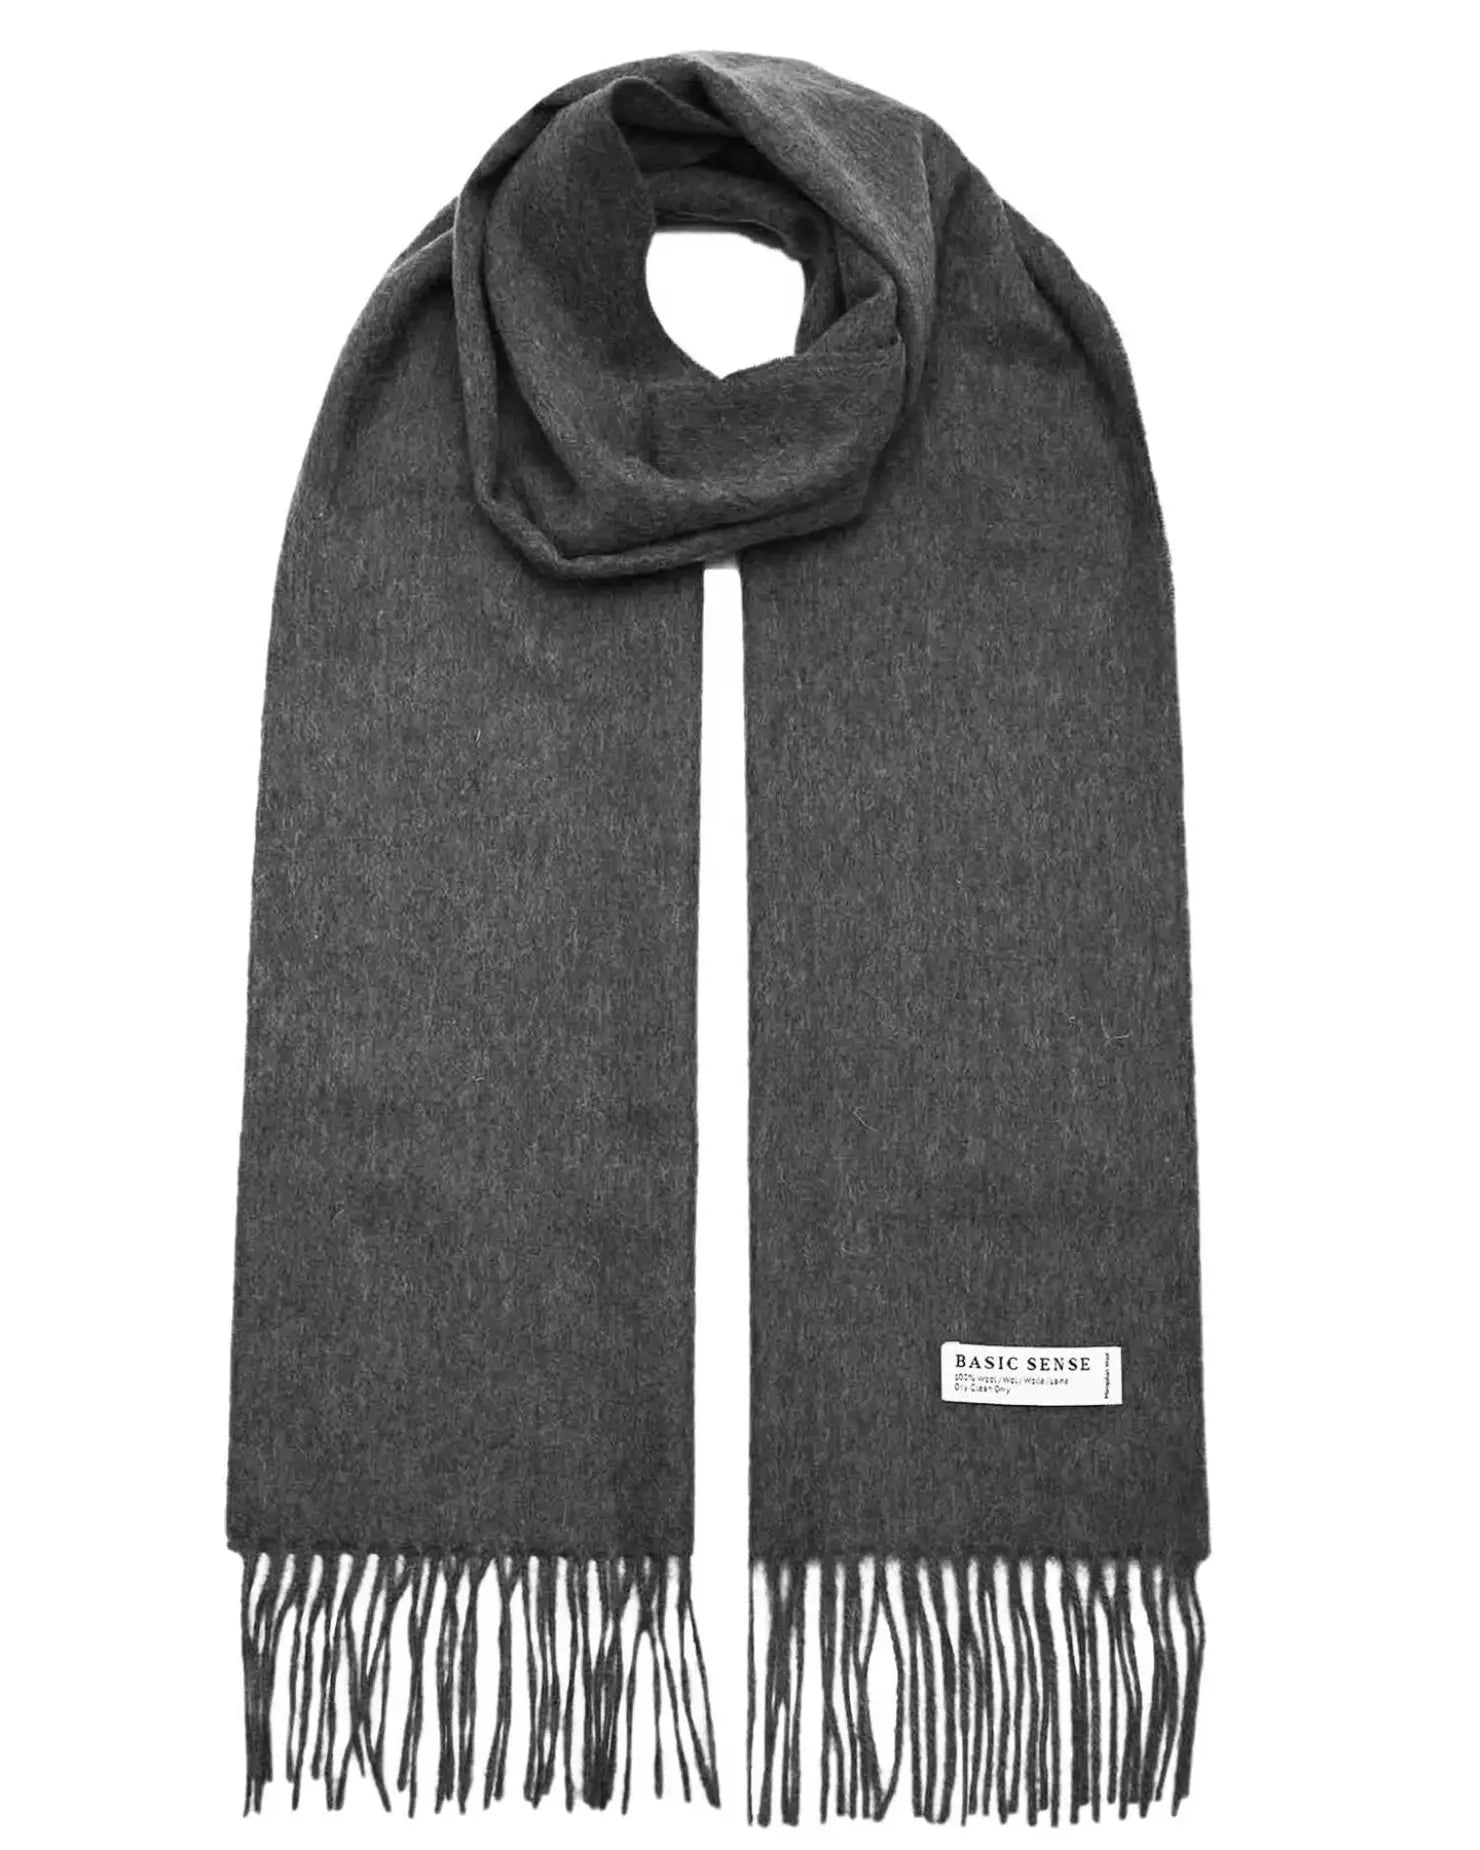 Mongolian wool scarf with fringes, soft and warm